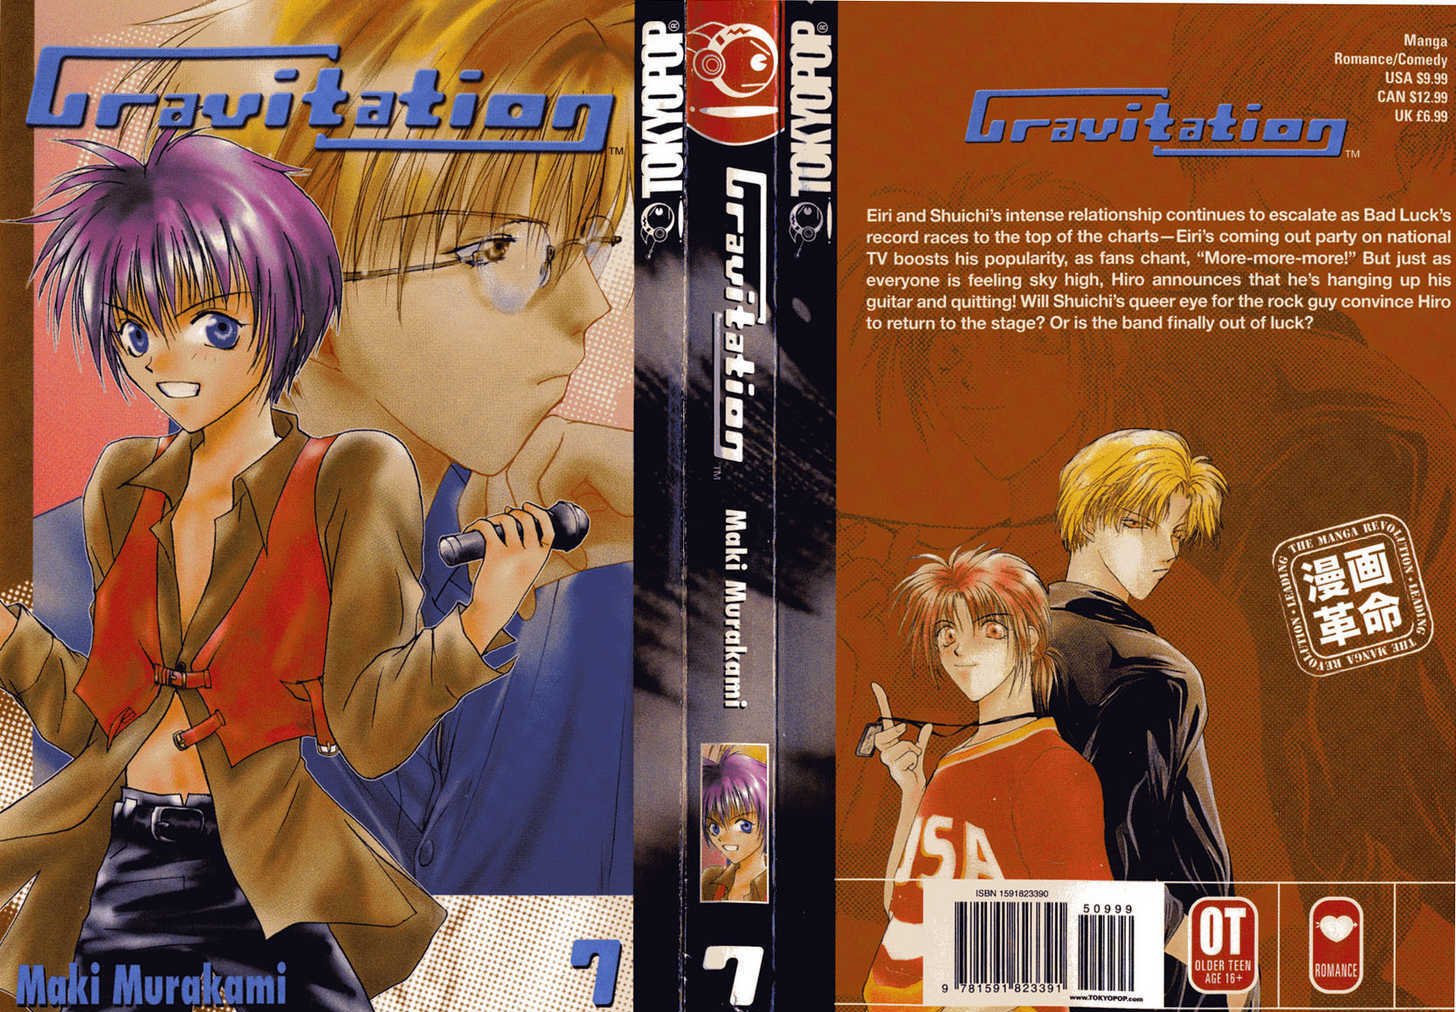 His confession is so funny and awkward 😂 | Gravitation (2000) - YouTube